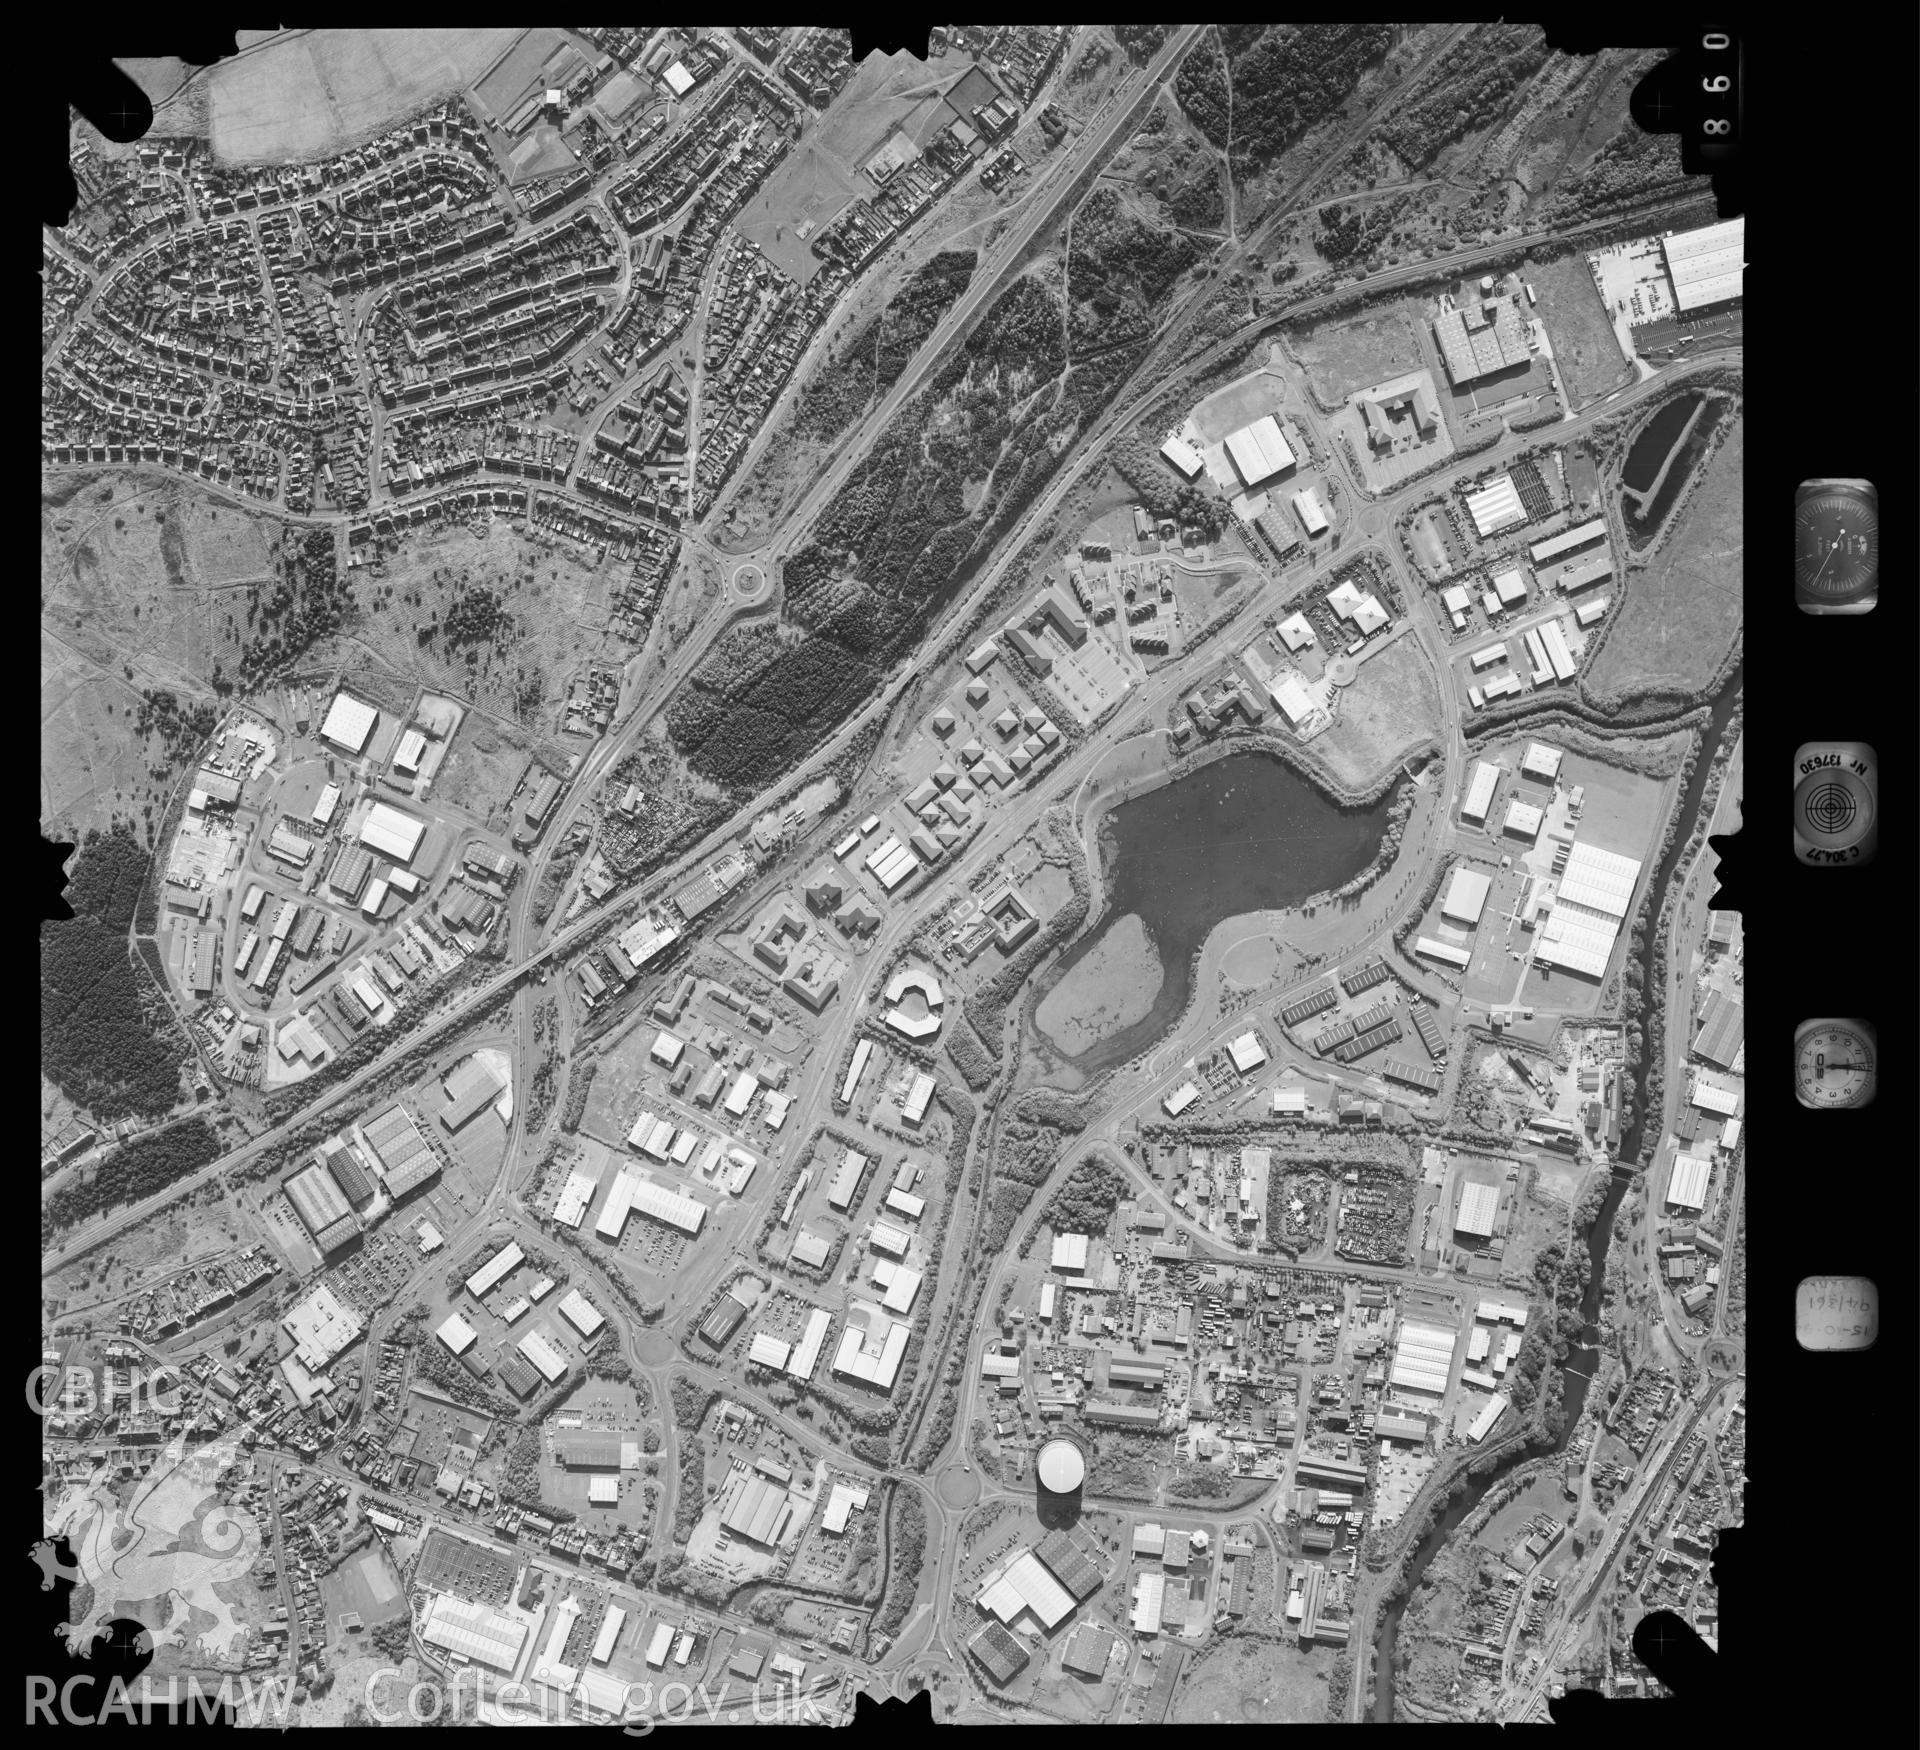 Digitized copy of an aerial photograph showing the Winsh-wen area f Swansea, taken by Ordnance Survey, 1994.